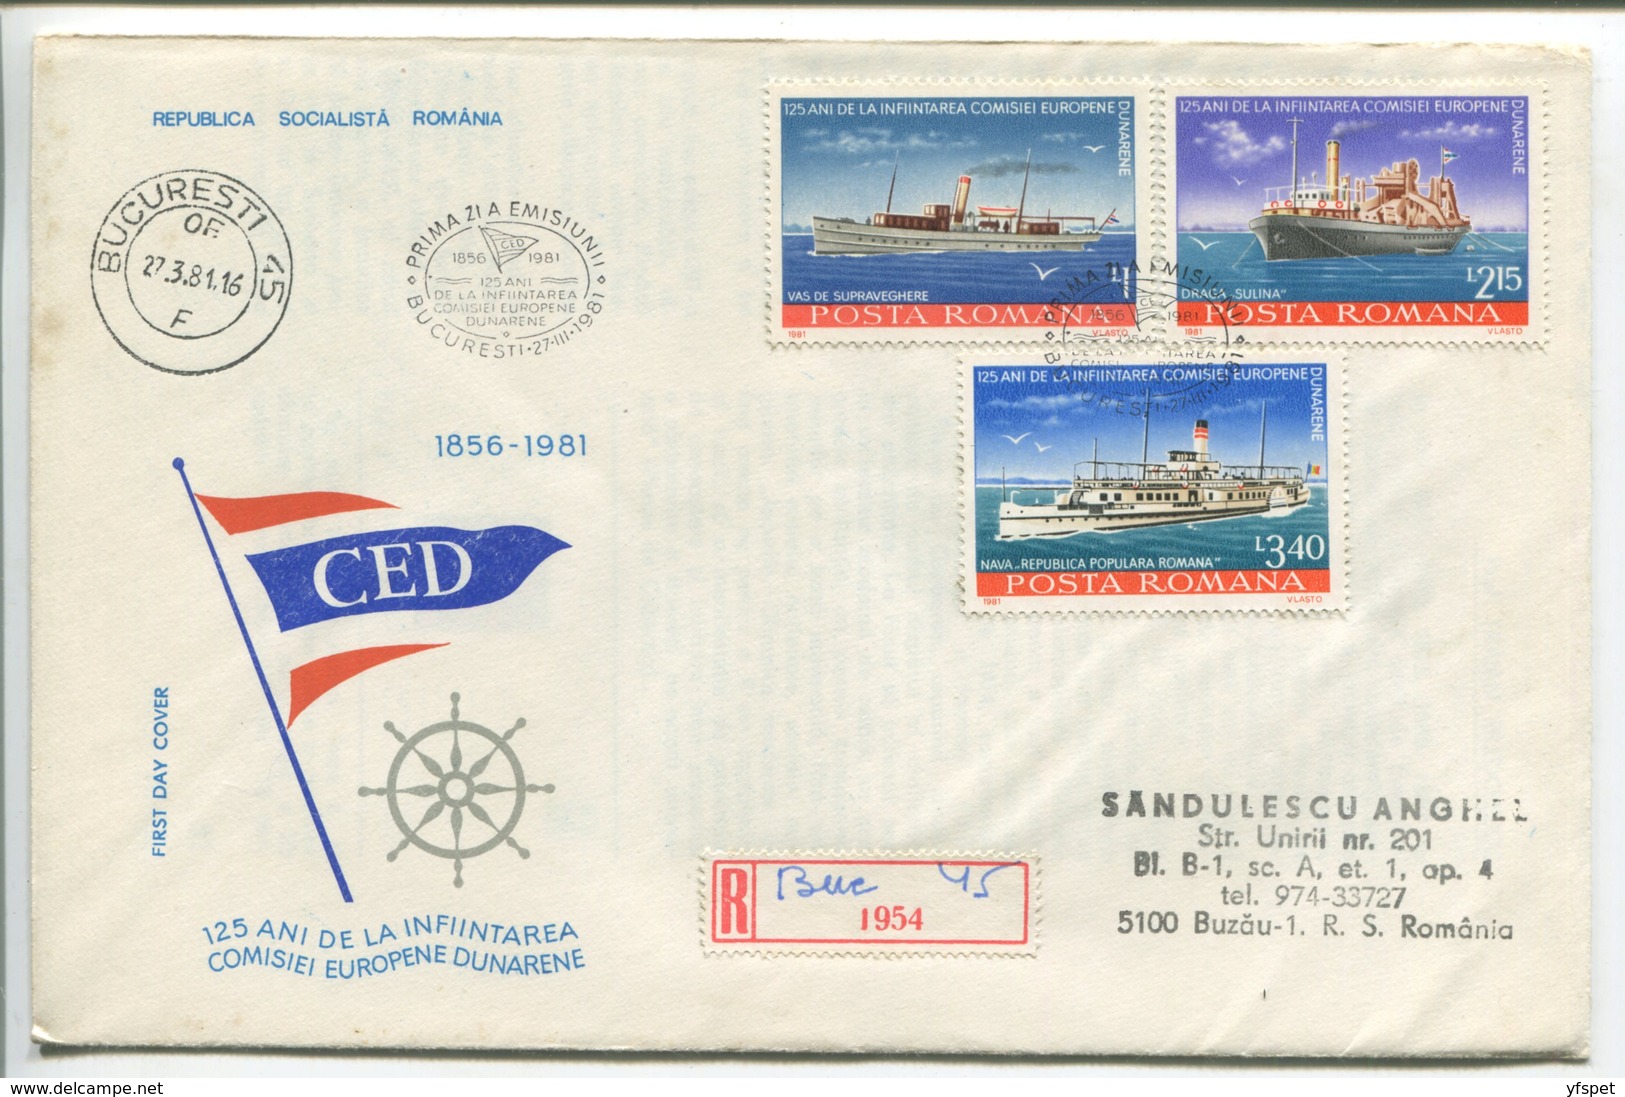 125 Years The European Danube Comission, 1981 - Circulated FDCs - FDC